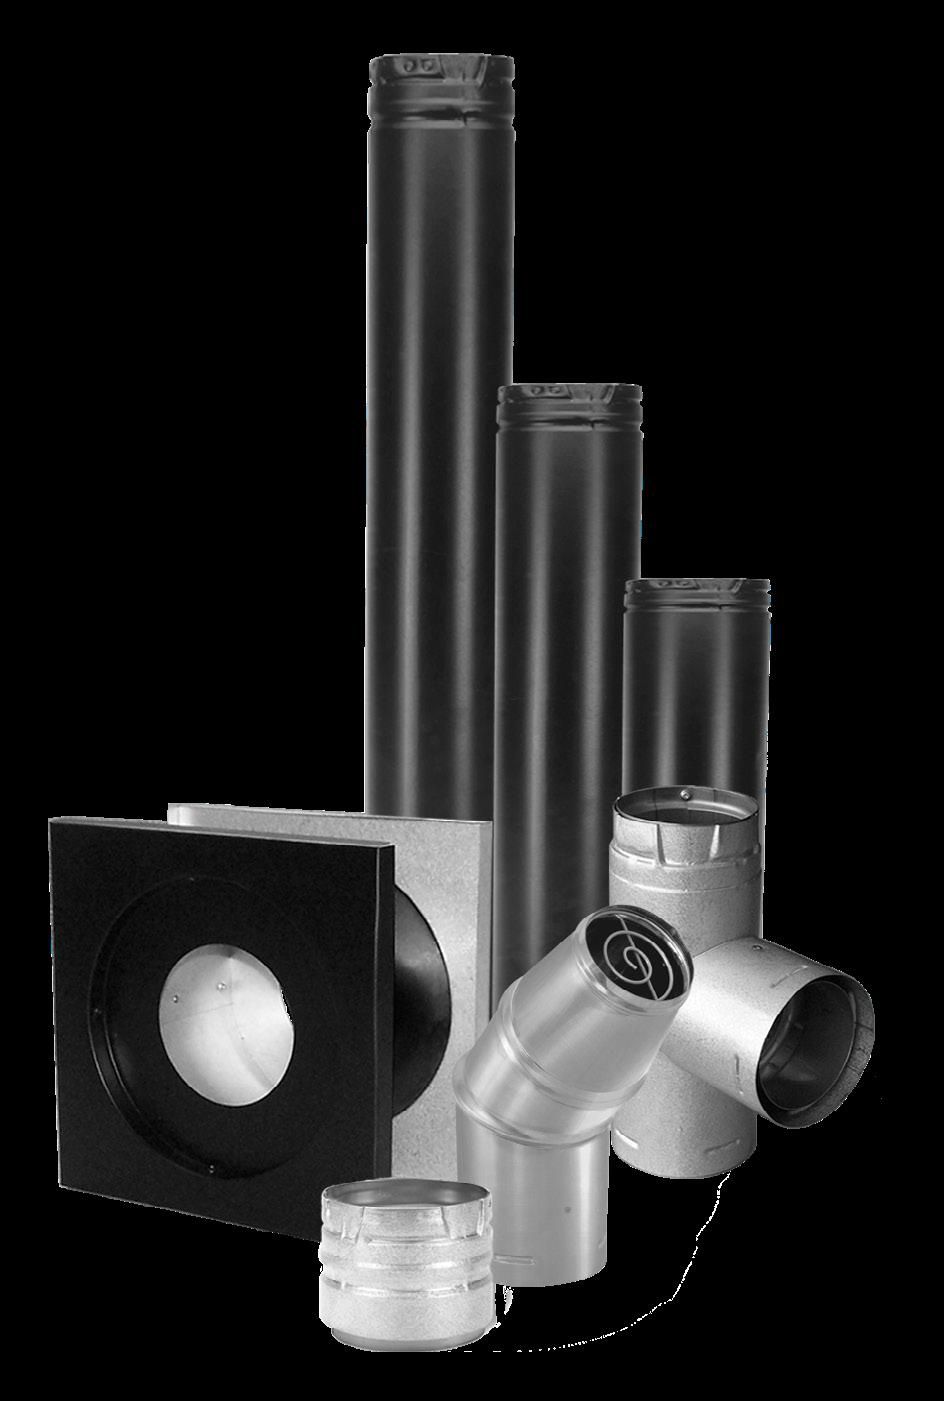 (Rated for continuous use flue temperatures up to 570 F.) Materials and Construction Laser-welded, double-wall pipe with a.012 inner wall of 444 stainless steel and a.